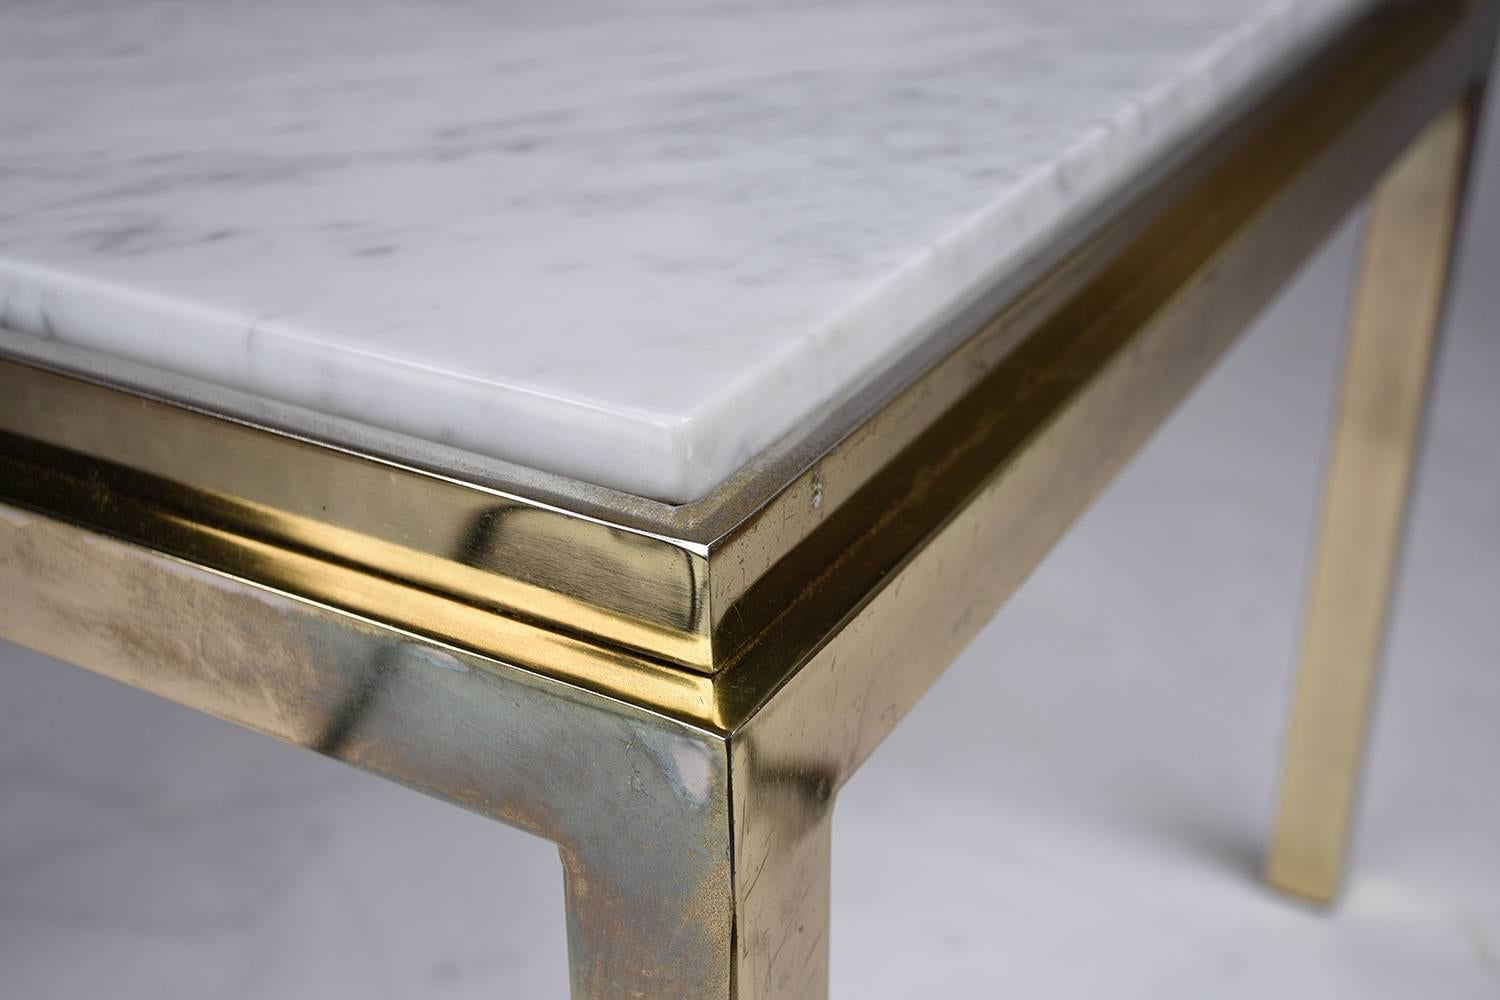 This 1970s vintage modern-style square coffee table features a brass frame and marble-top. The simple brass frame is slightly faded but is accentuated by the white Carrara marble top with a flat polish. This coffee table is sturdy, stylish, and